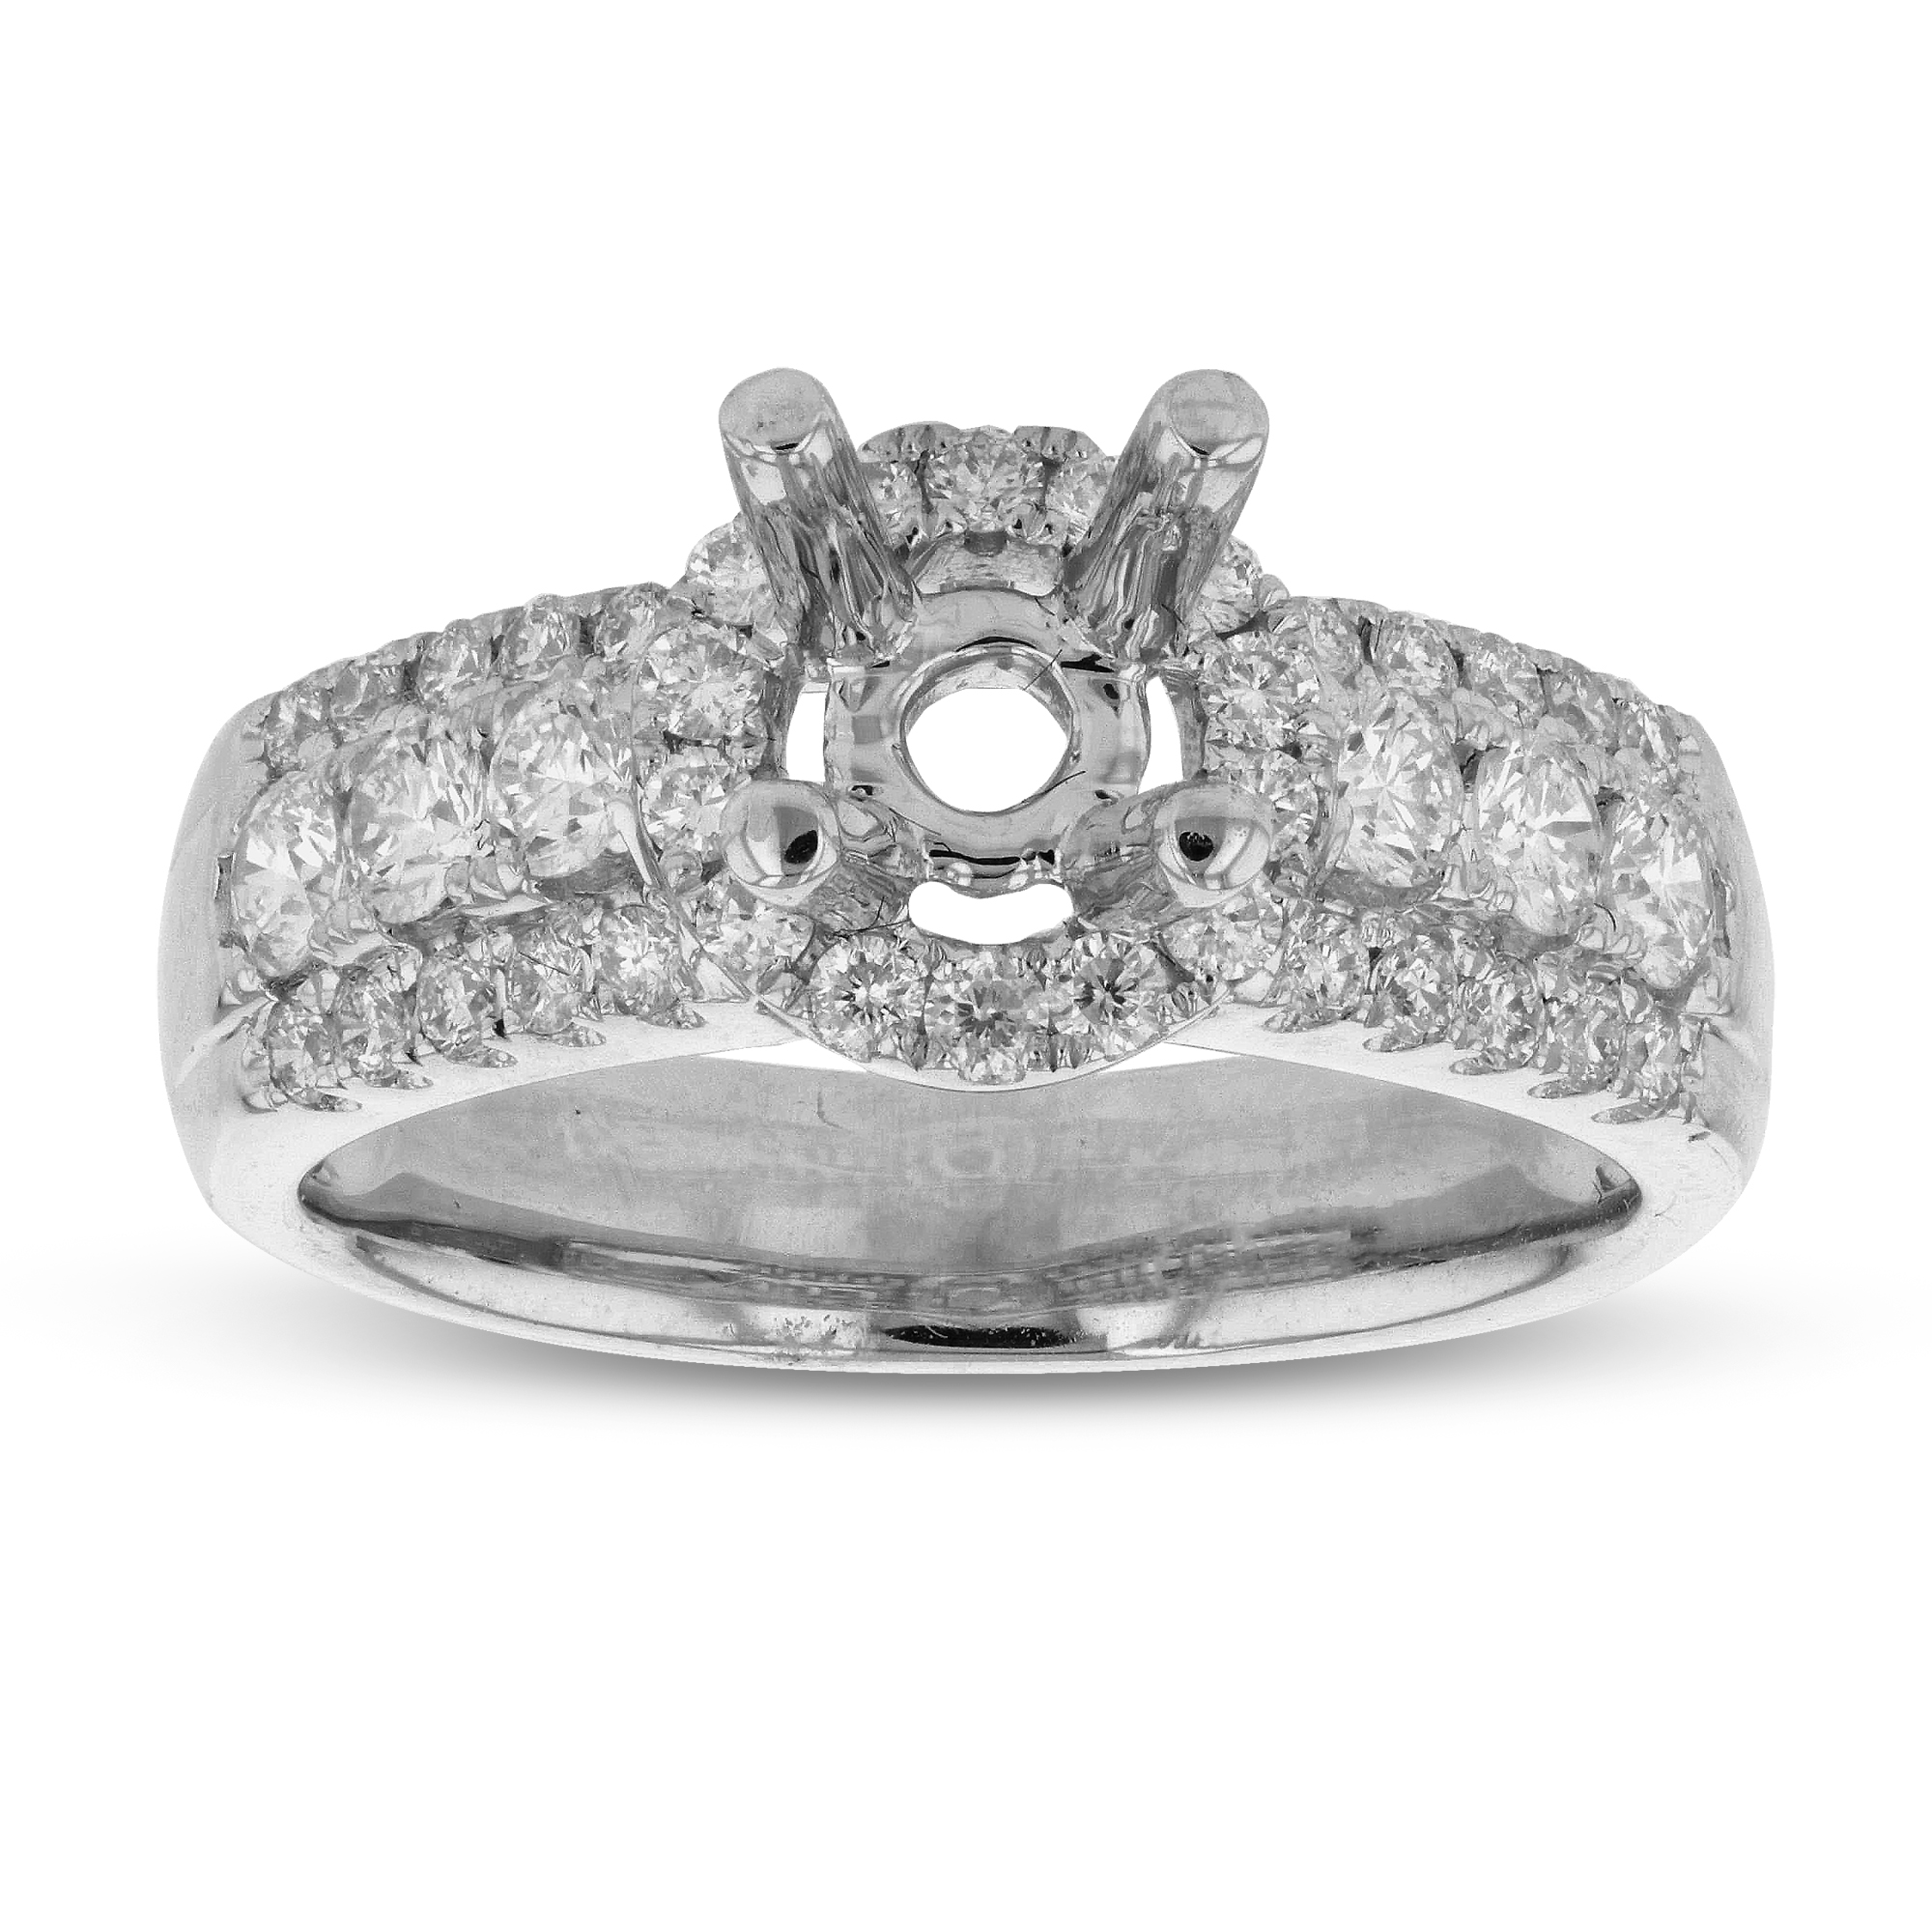 View 0.72ctw Diamonds Semi Mount Engagement Ring in 18k White Gold